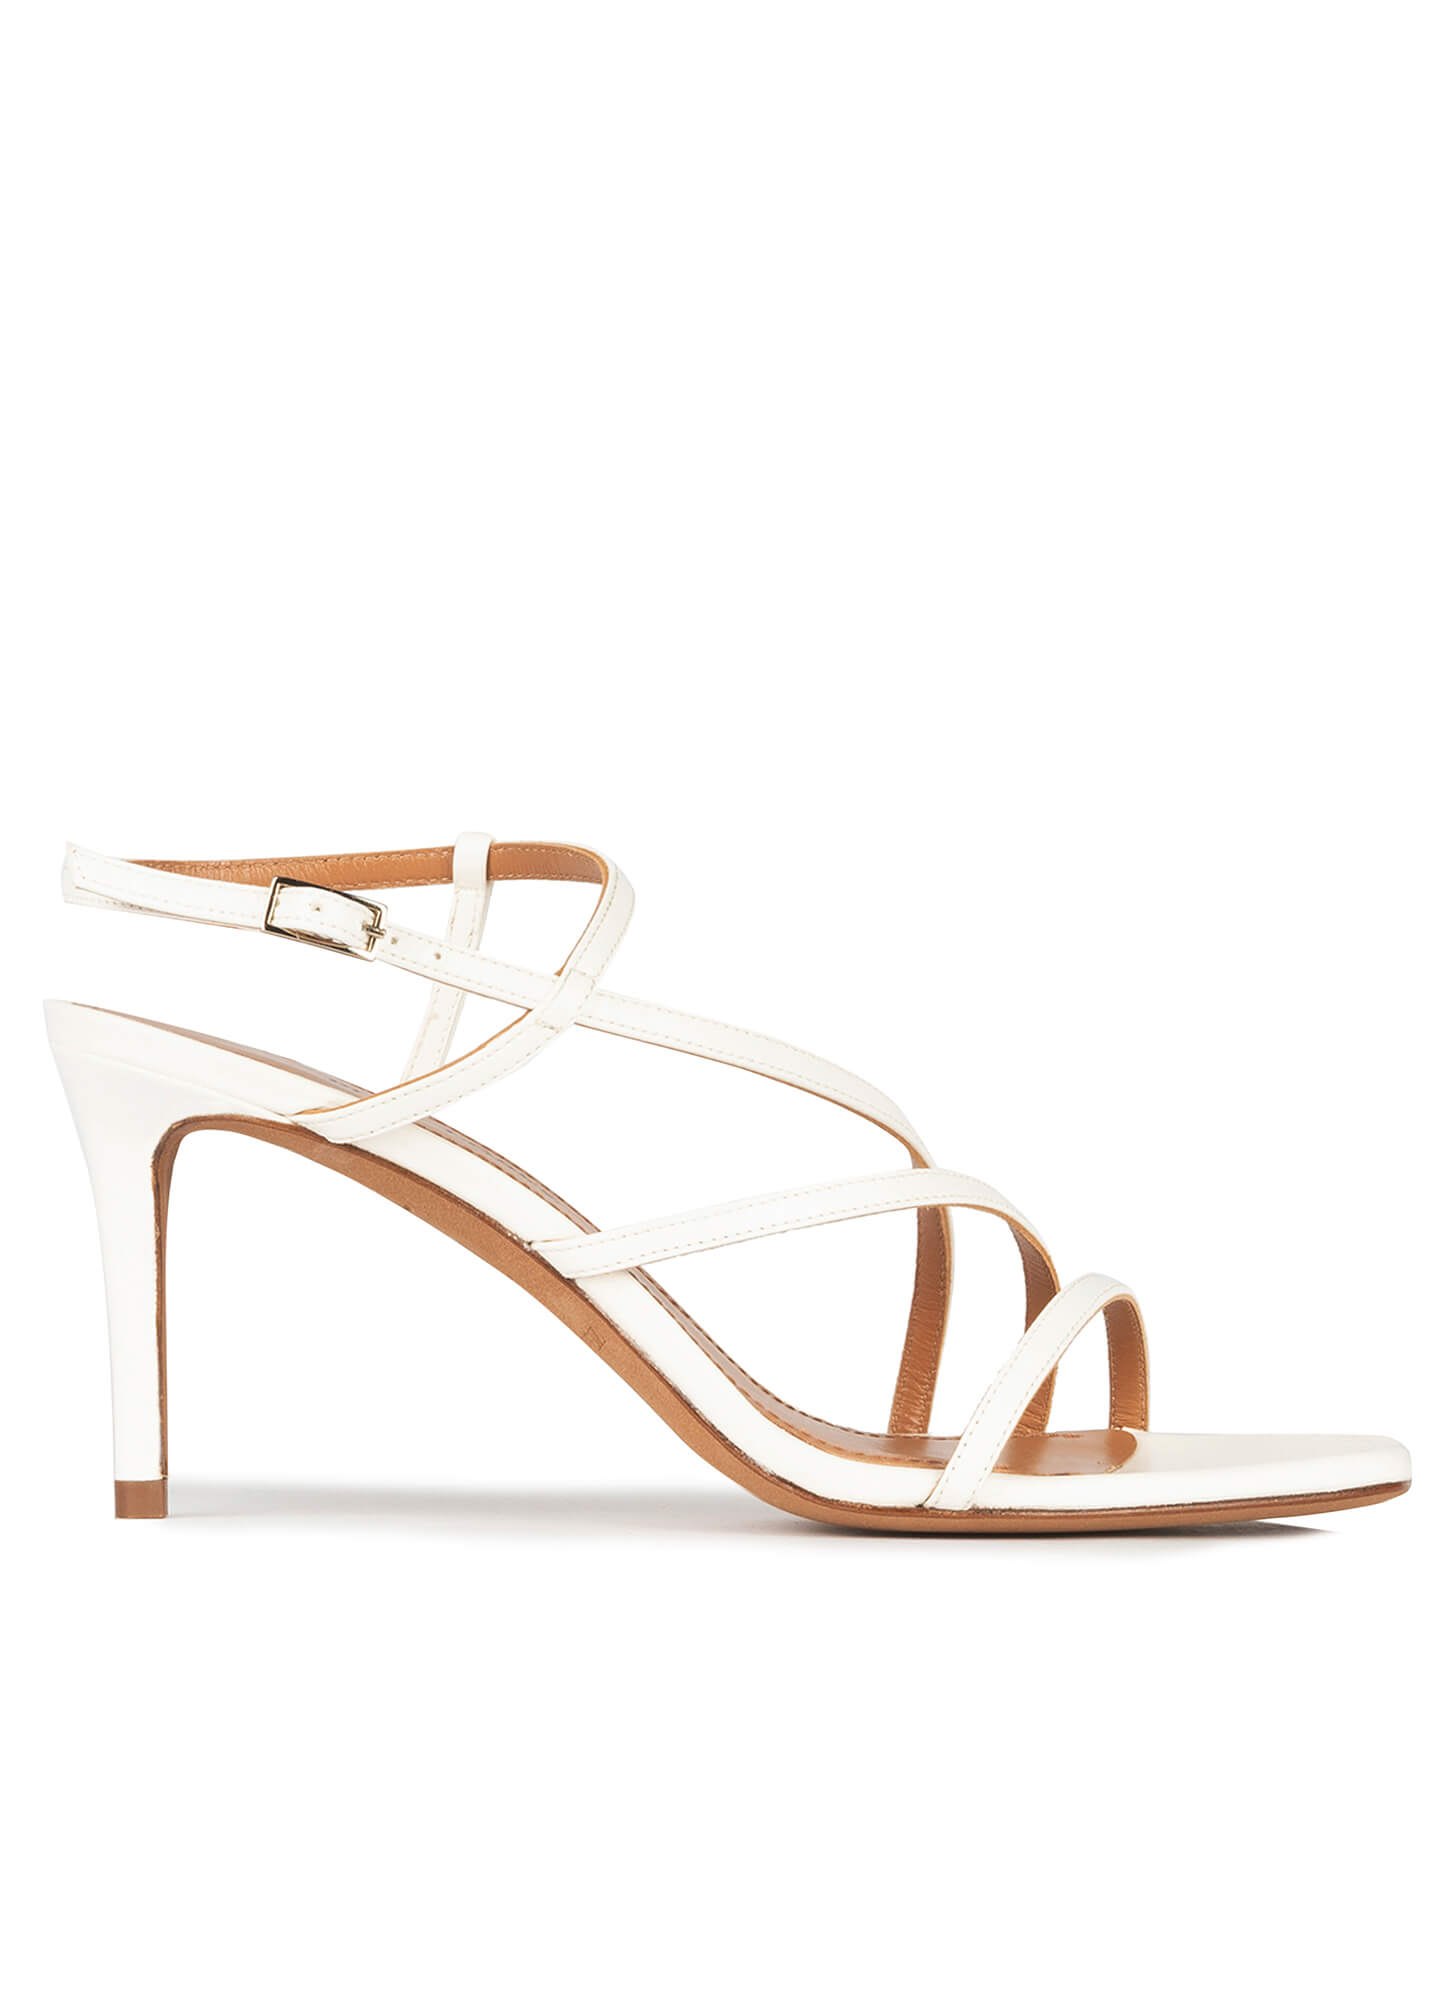 Off-white leather strappy mid heel sandals . PURA LOPEZ